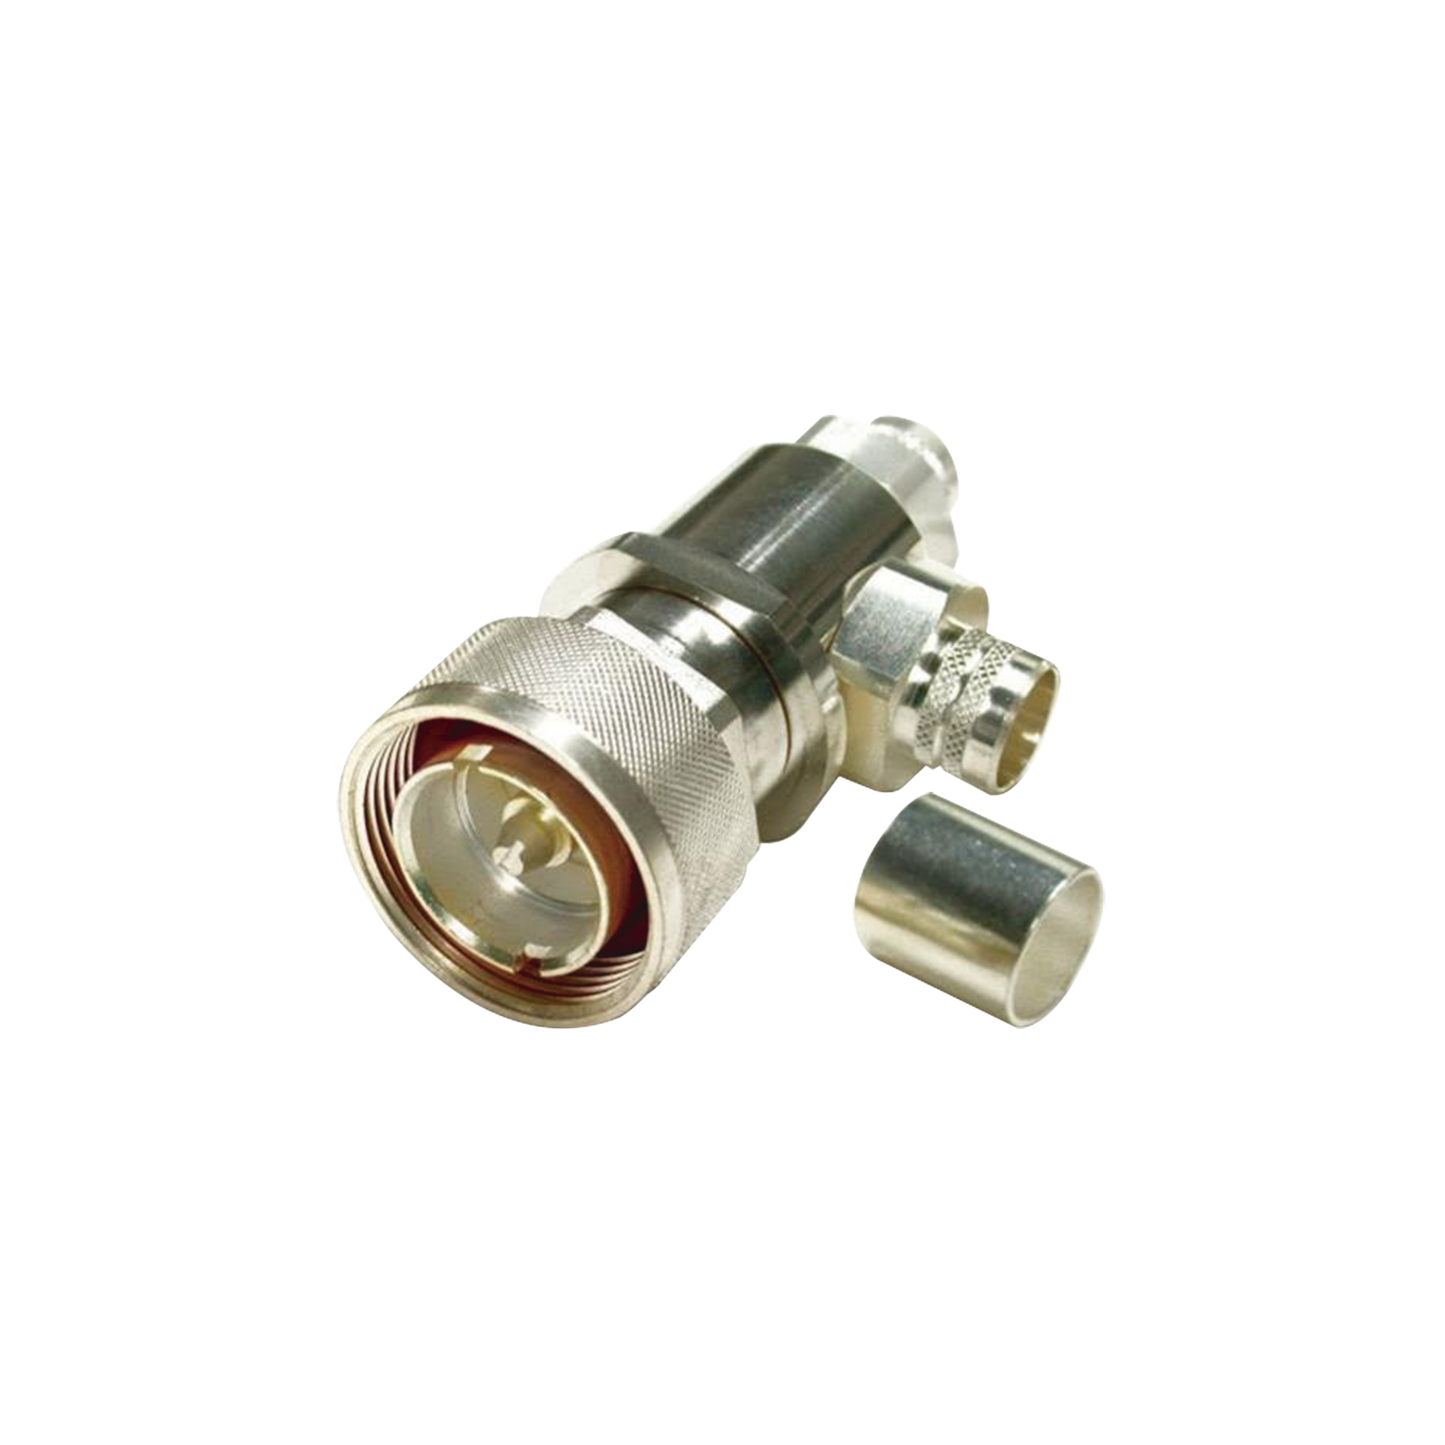 7-16DIN Male Plug, COMBO Straight or Right Angle to Crimp on LMR-600, Silver/ Silver/ PTFE.